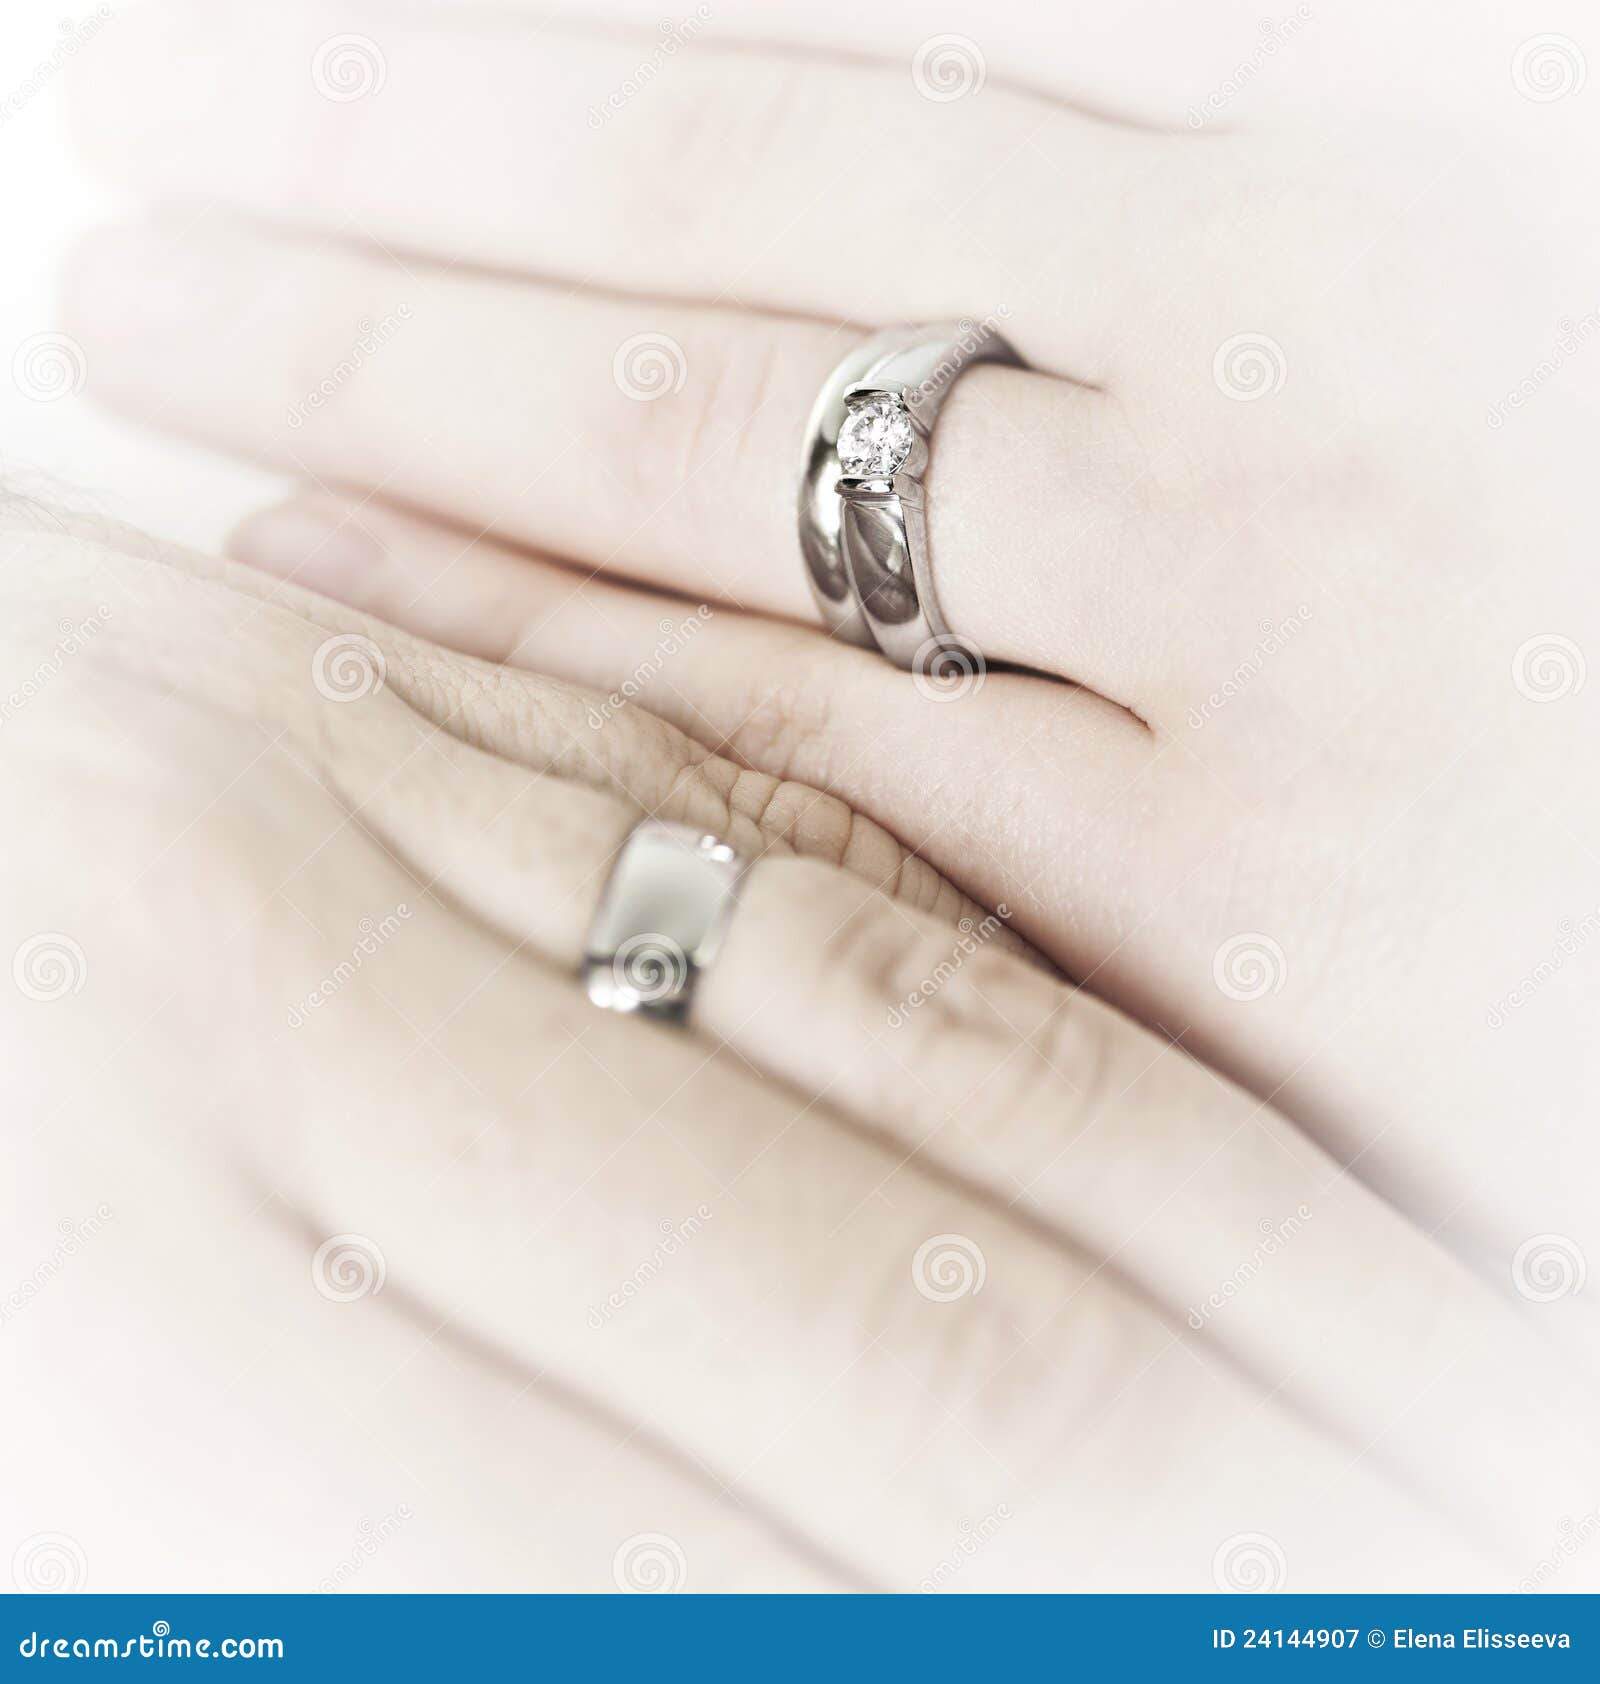 More similar stock images of ` Hands wearing wedding rings `